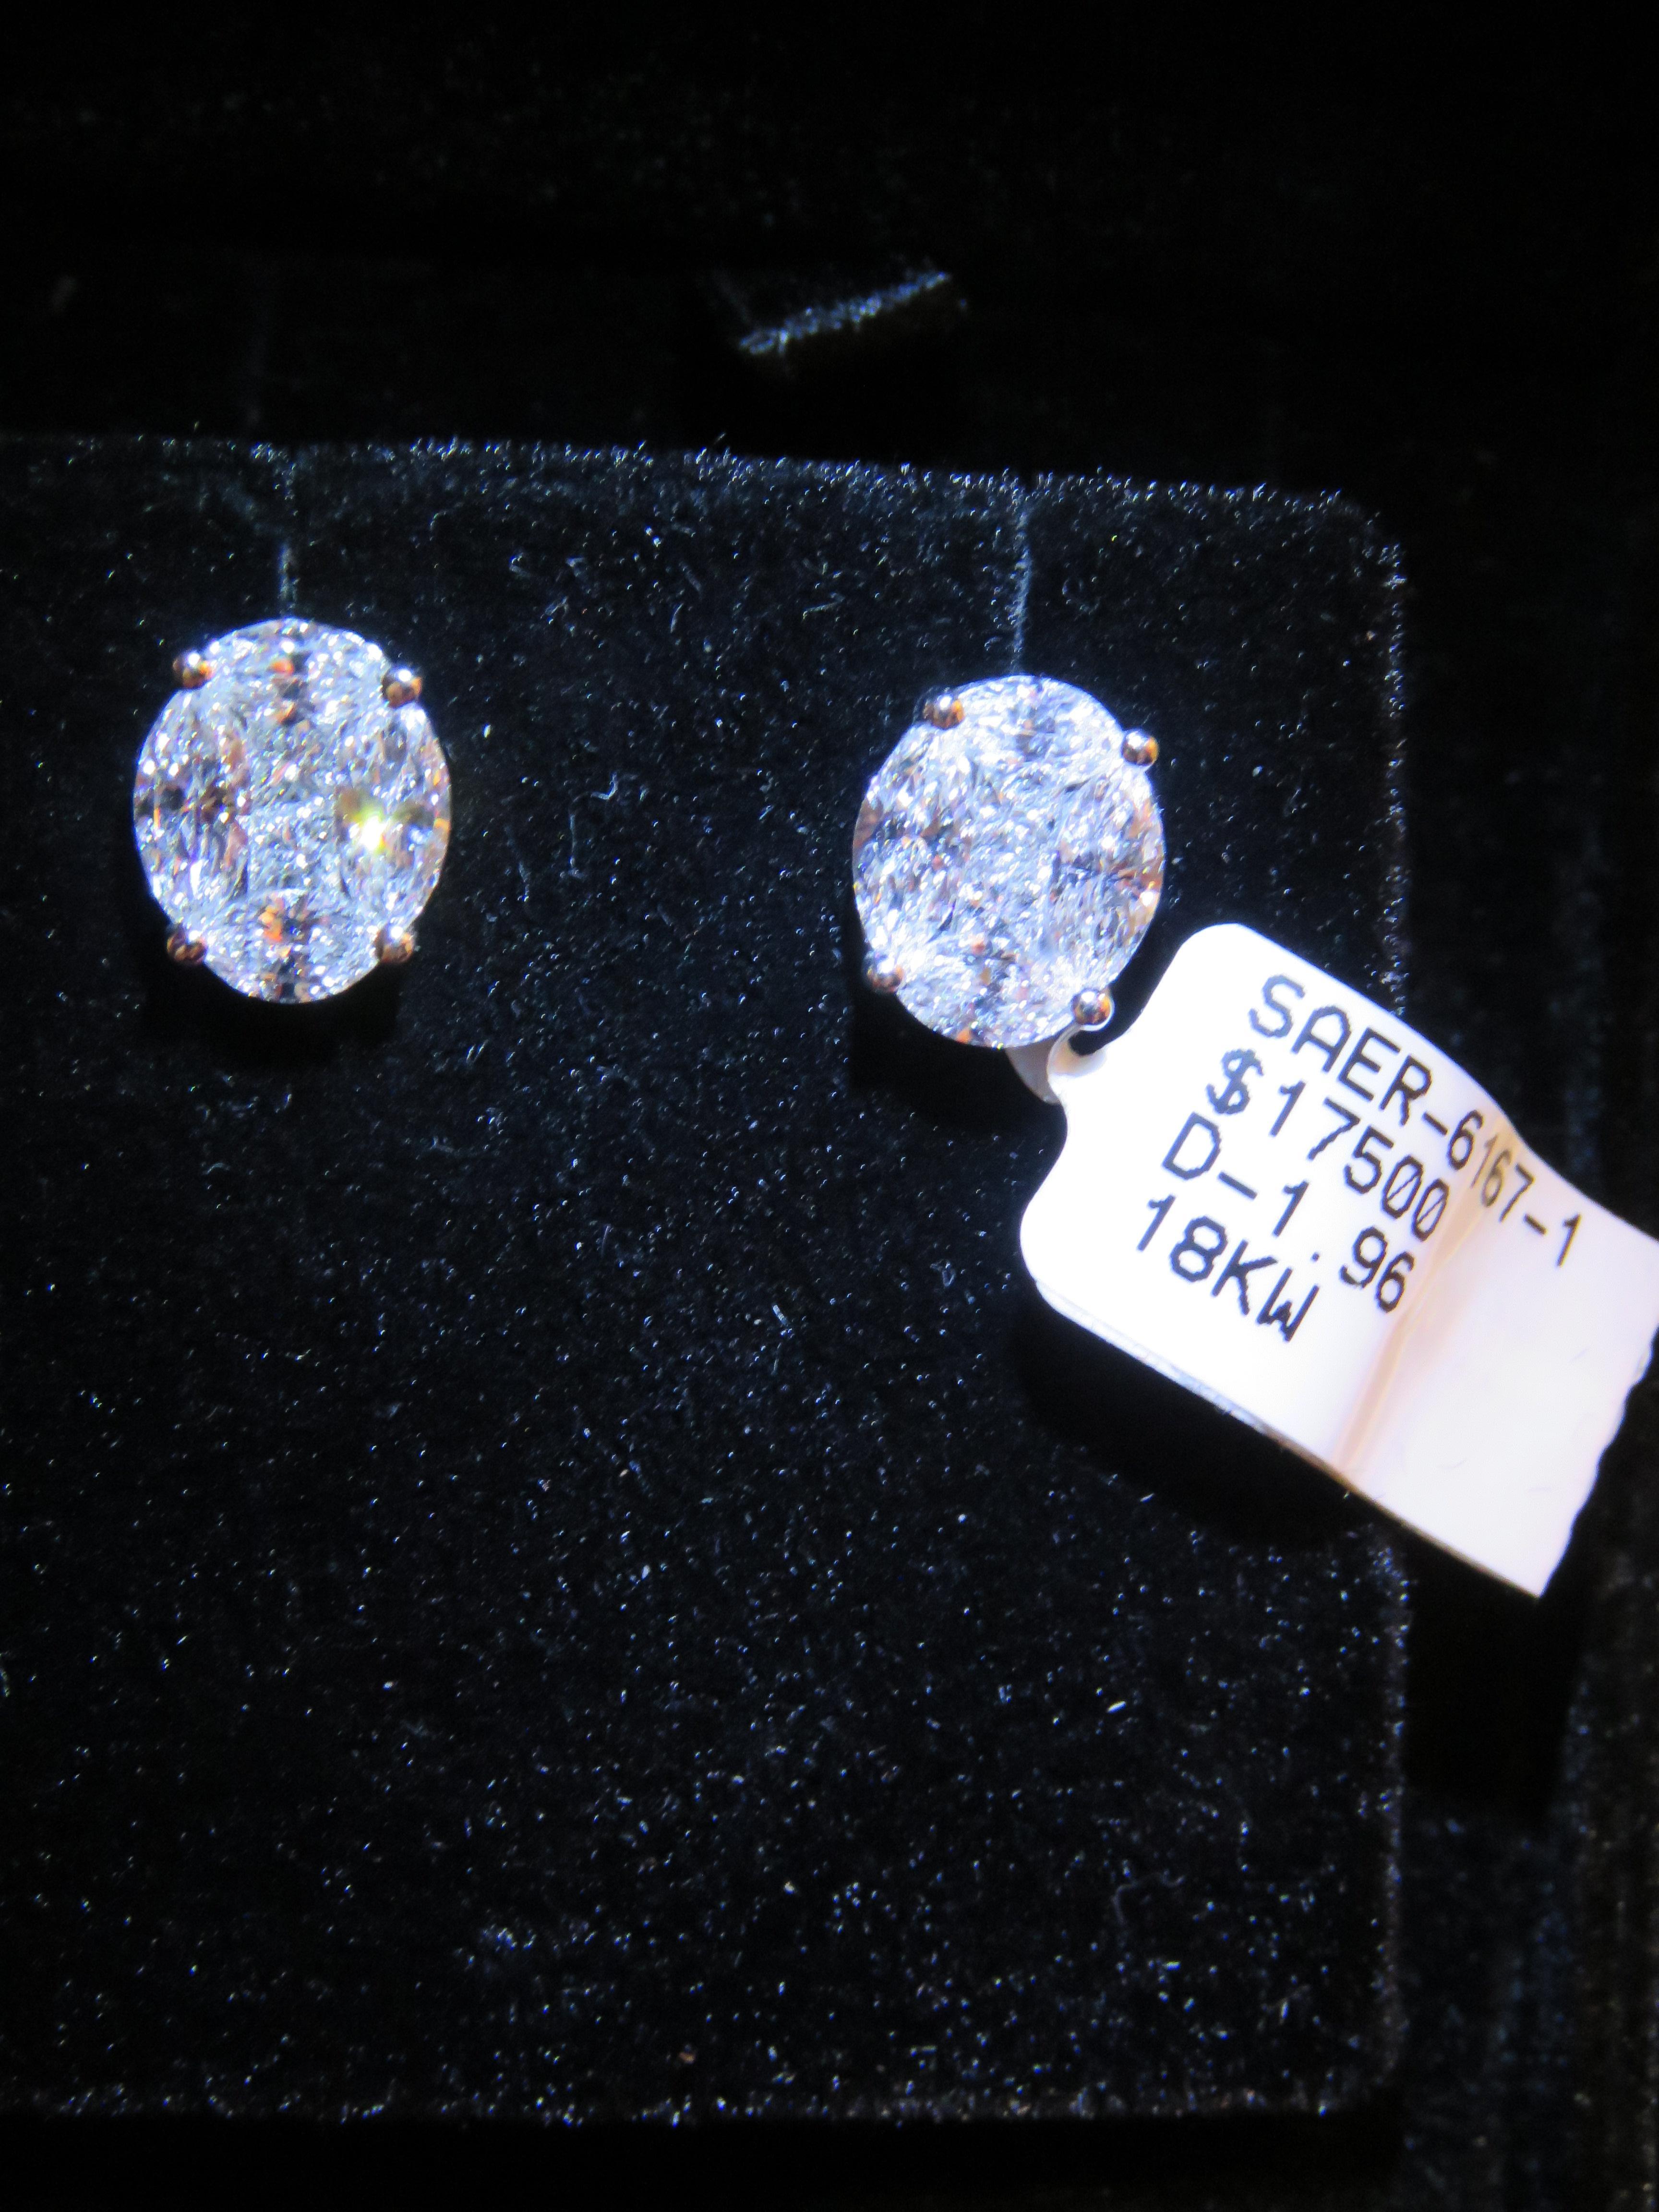 The Following Items we are offering is a Rare Important Radiant 18KT White Gold Stunning Diamond Halo Stud Earrings. Earrings feature Magnificent Rare Sparkling Fine Glittering Trillion Baguette and Round Diamonds!! T.C.W. Approx .65CTS!!! These